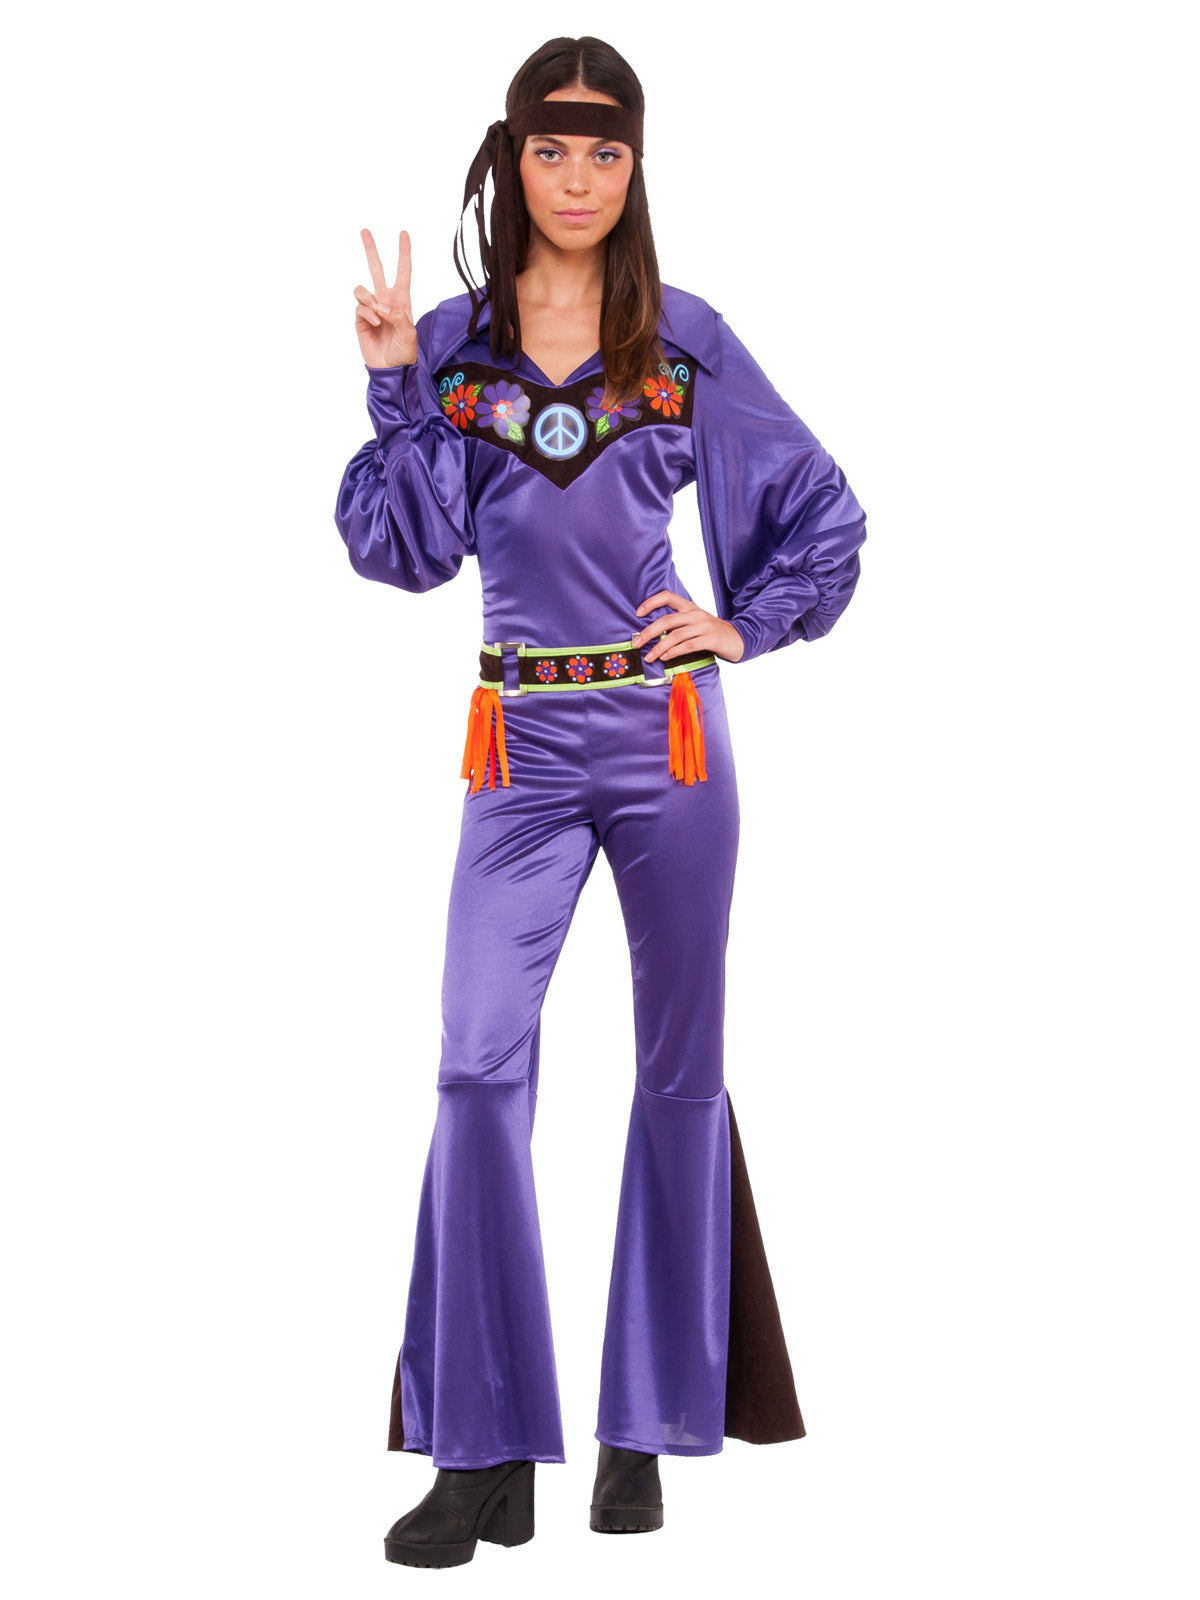 Hippie Costume for Adults